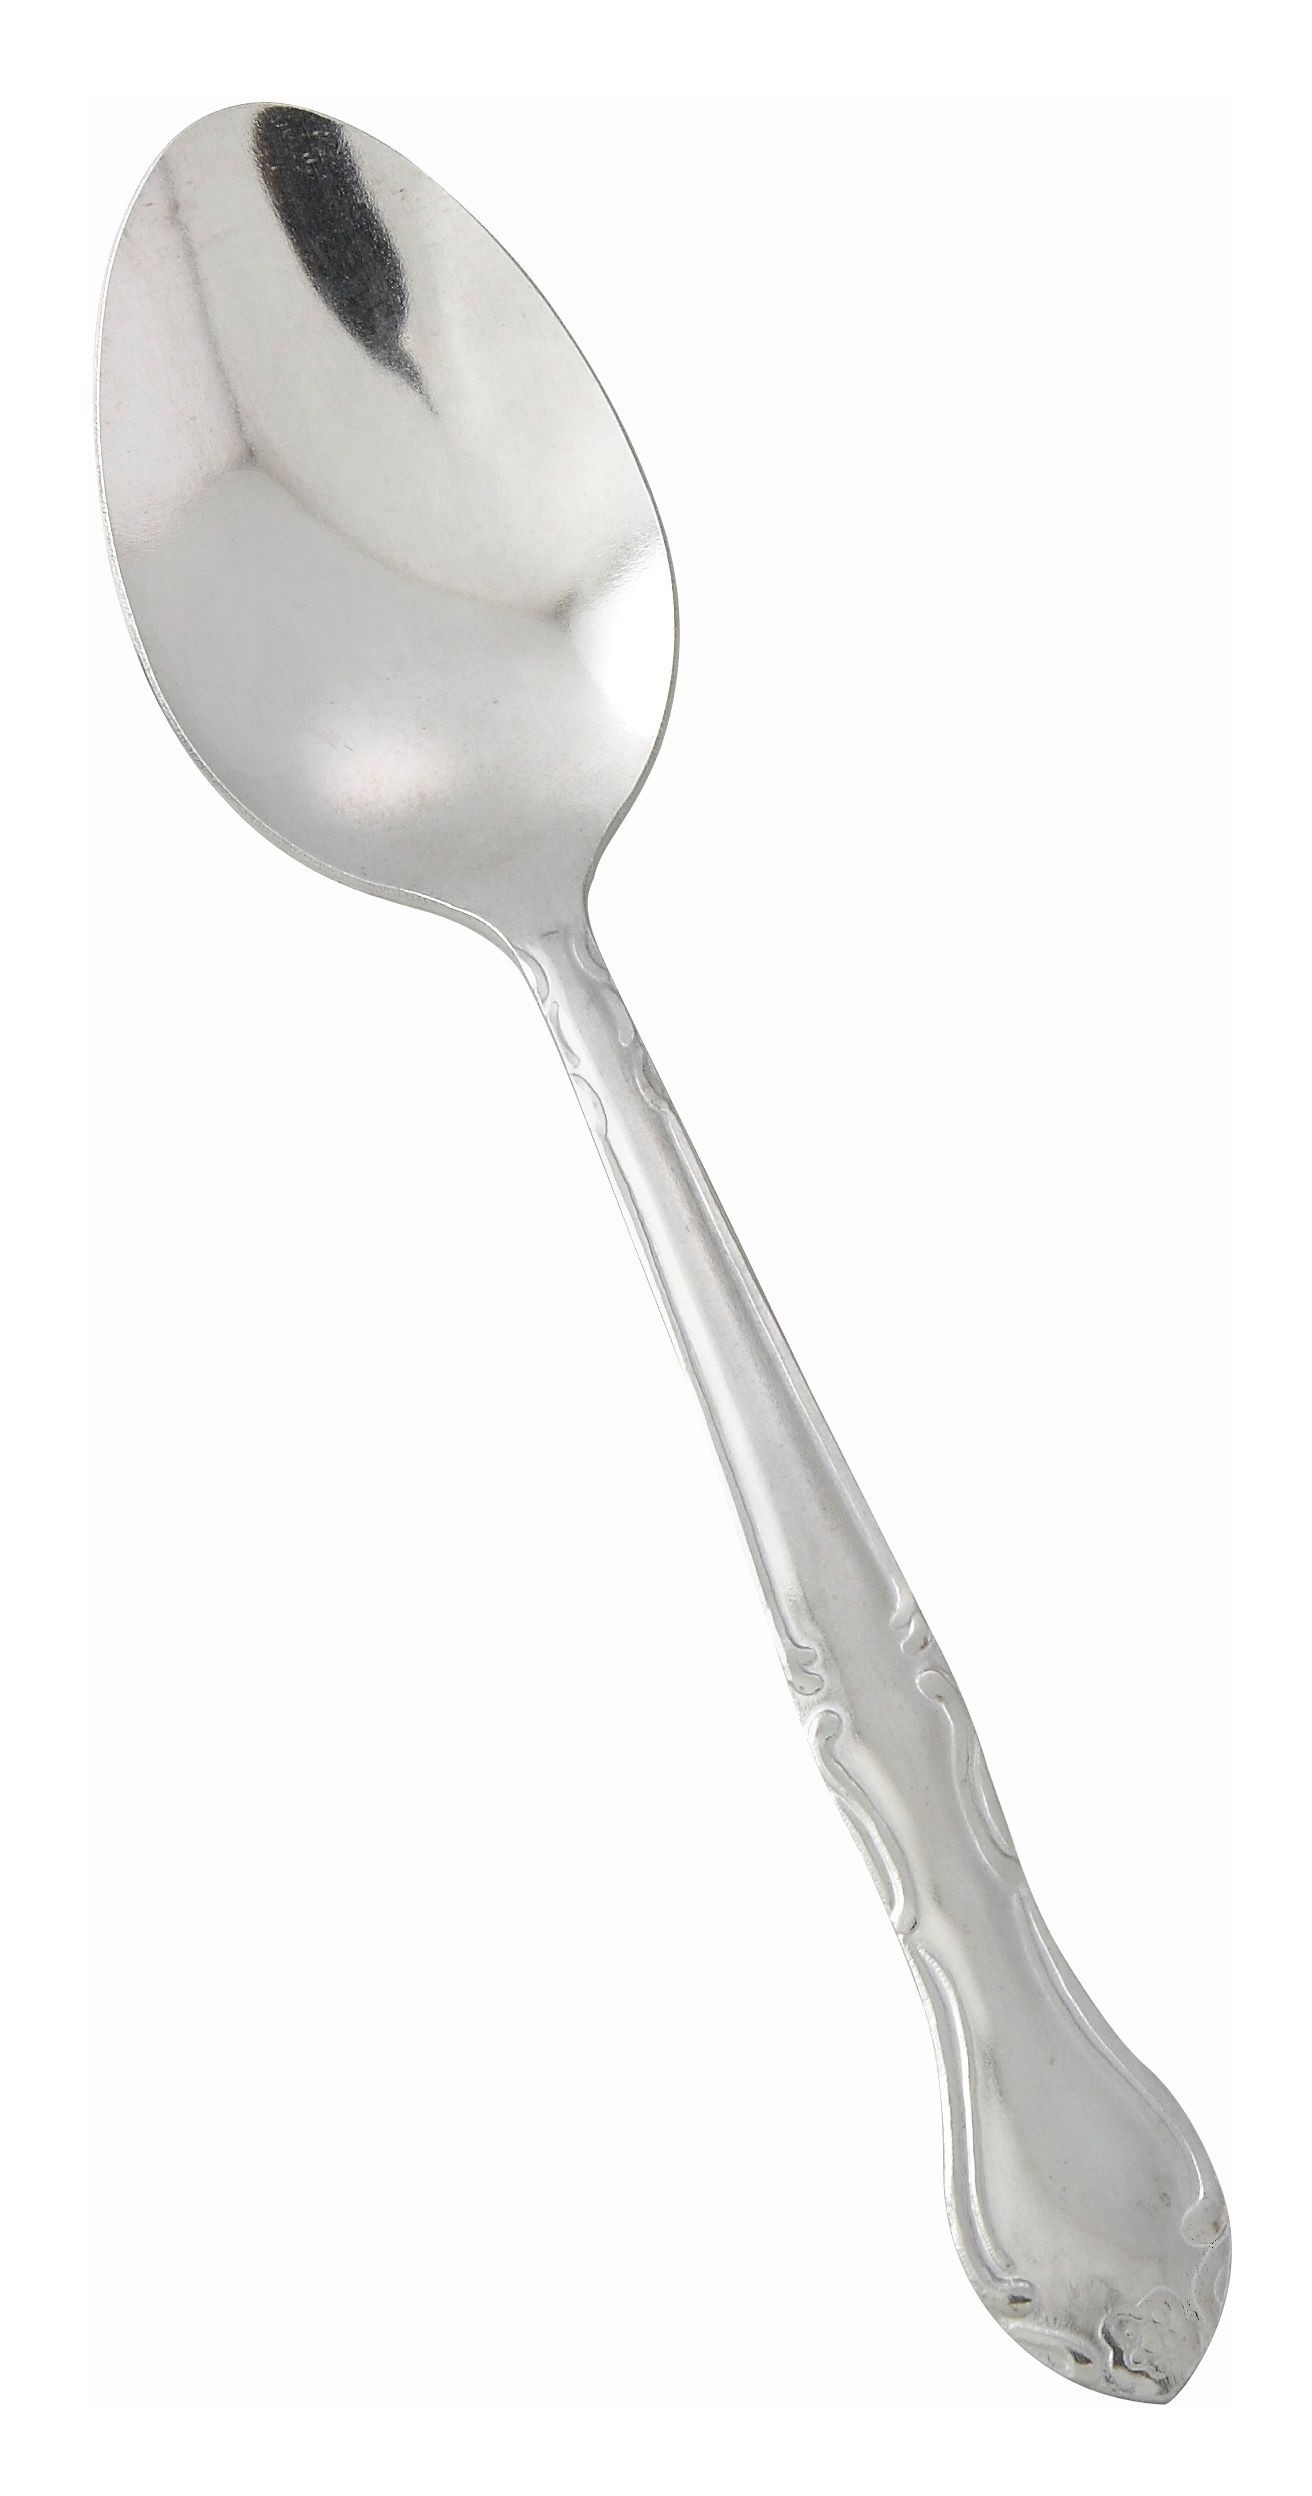 Winco 0004-03 Elegance Heavy Weight Vibro Finish Stainless Steel Dinner Spoon (12/Pack)